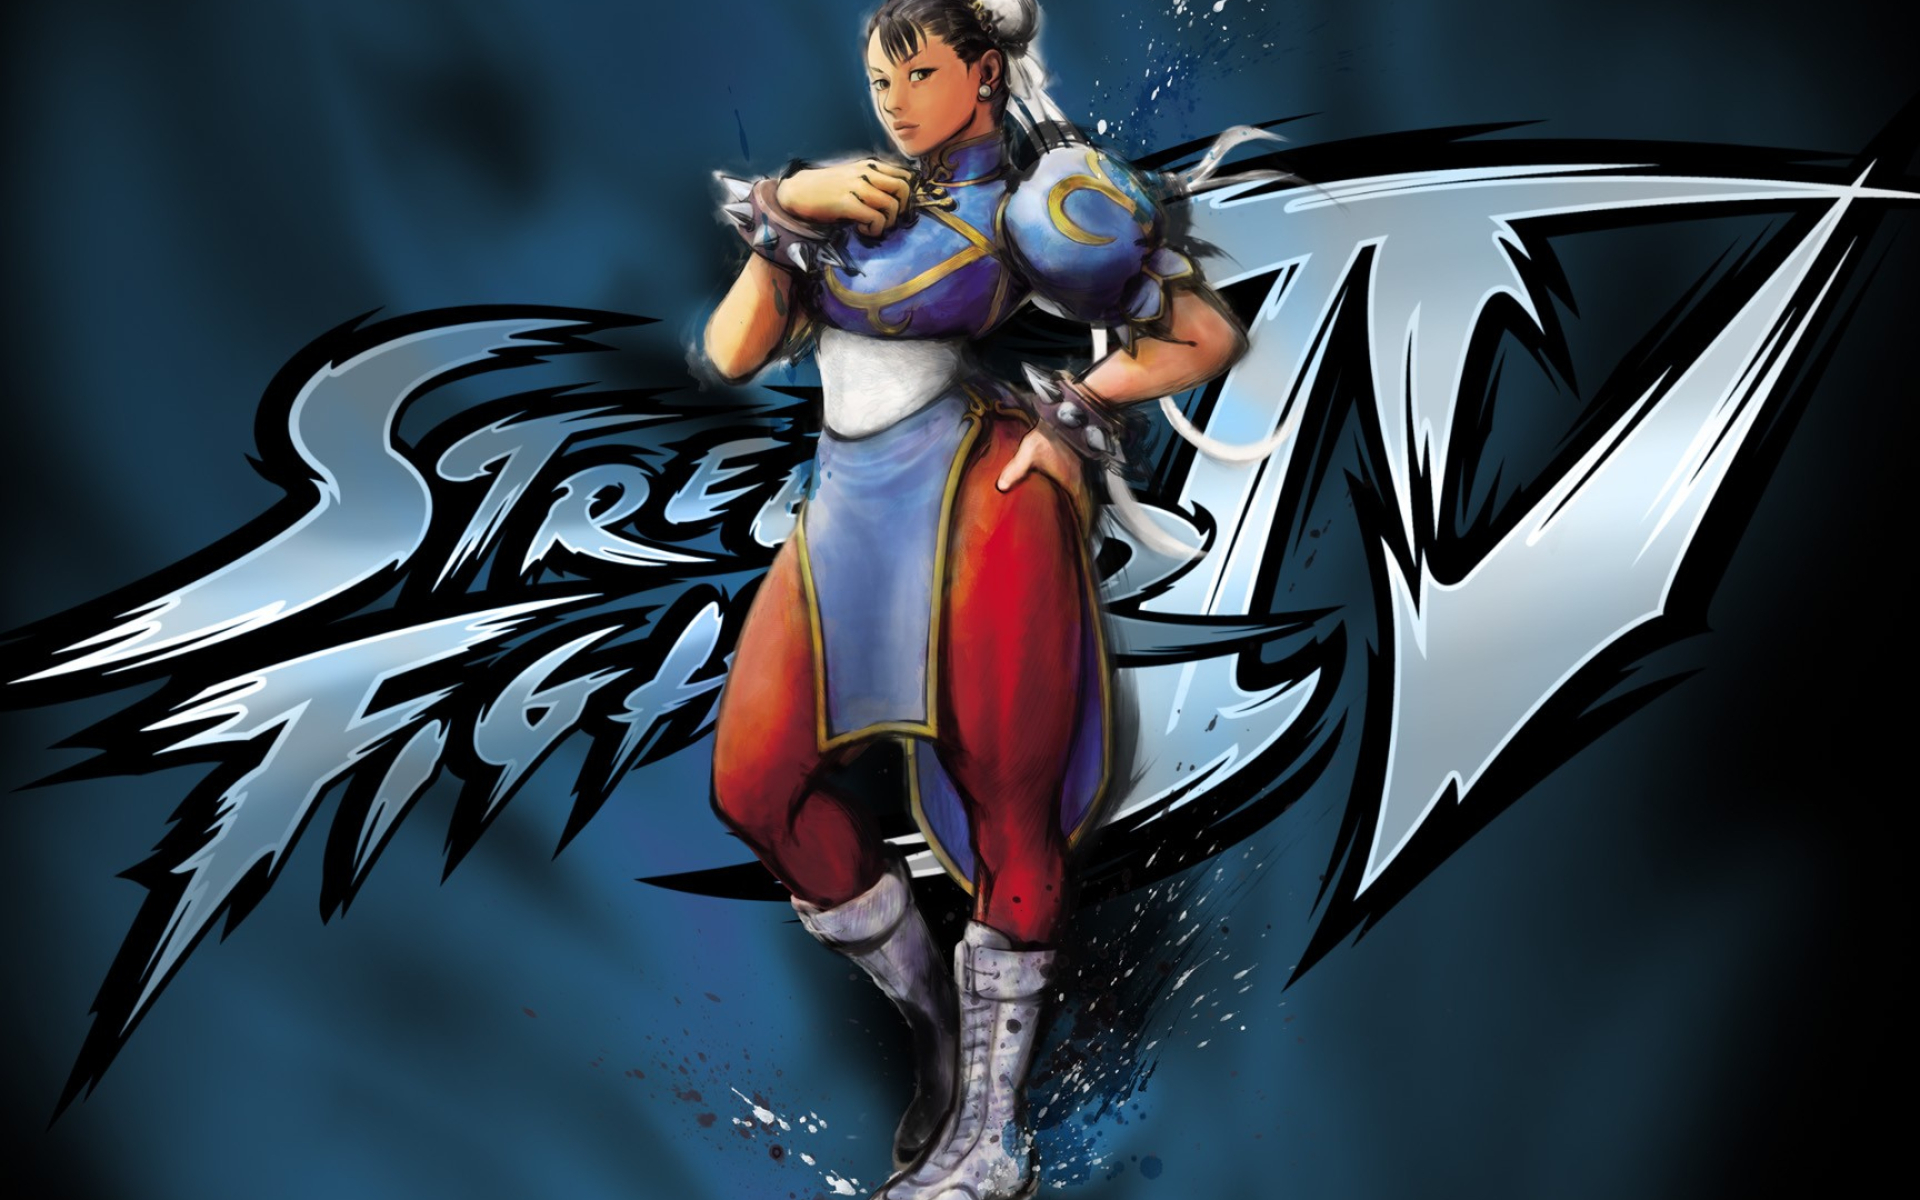 1920x1200 video, Games, Street, Fighter, Iv, Chun li Wallpapers HD / Desktop and Mobile Backgrounds